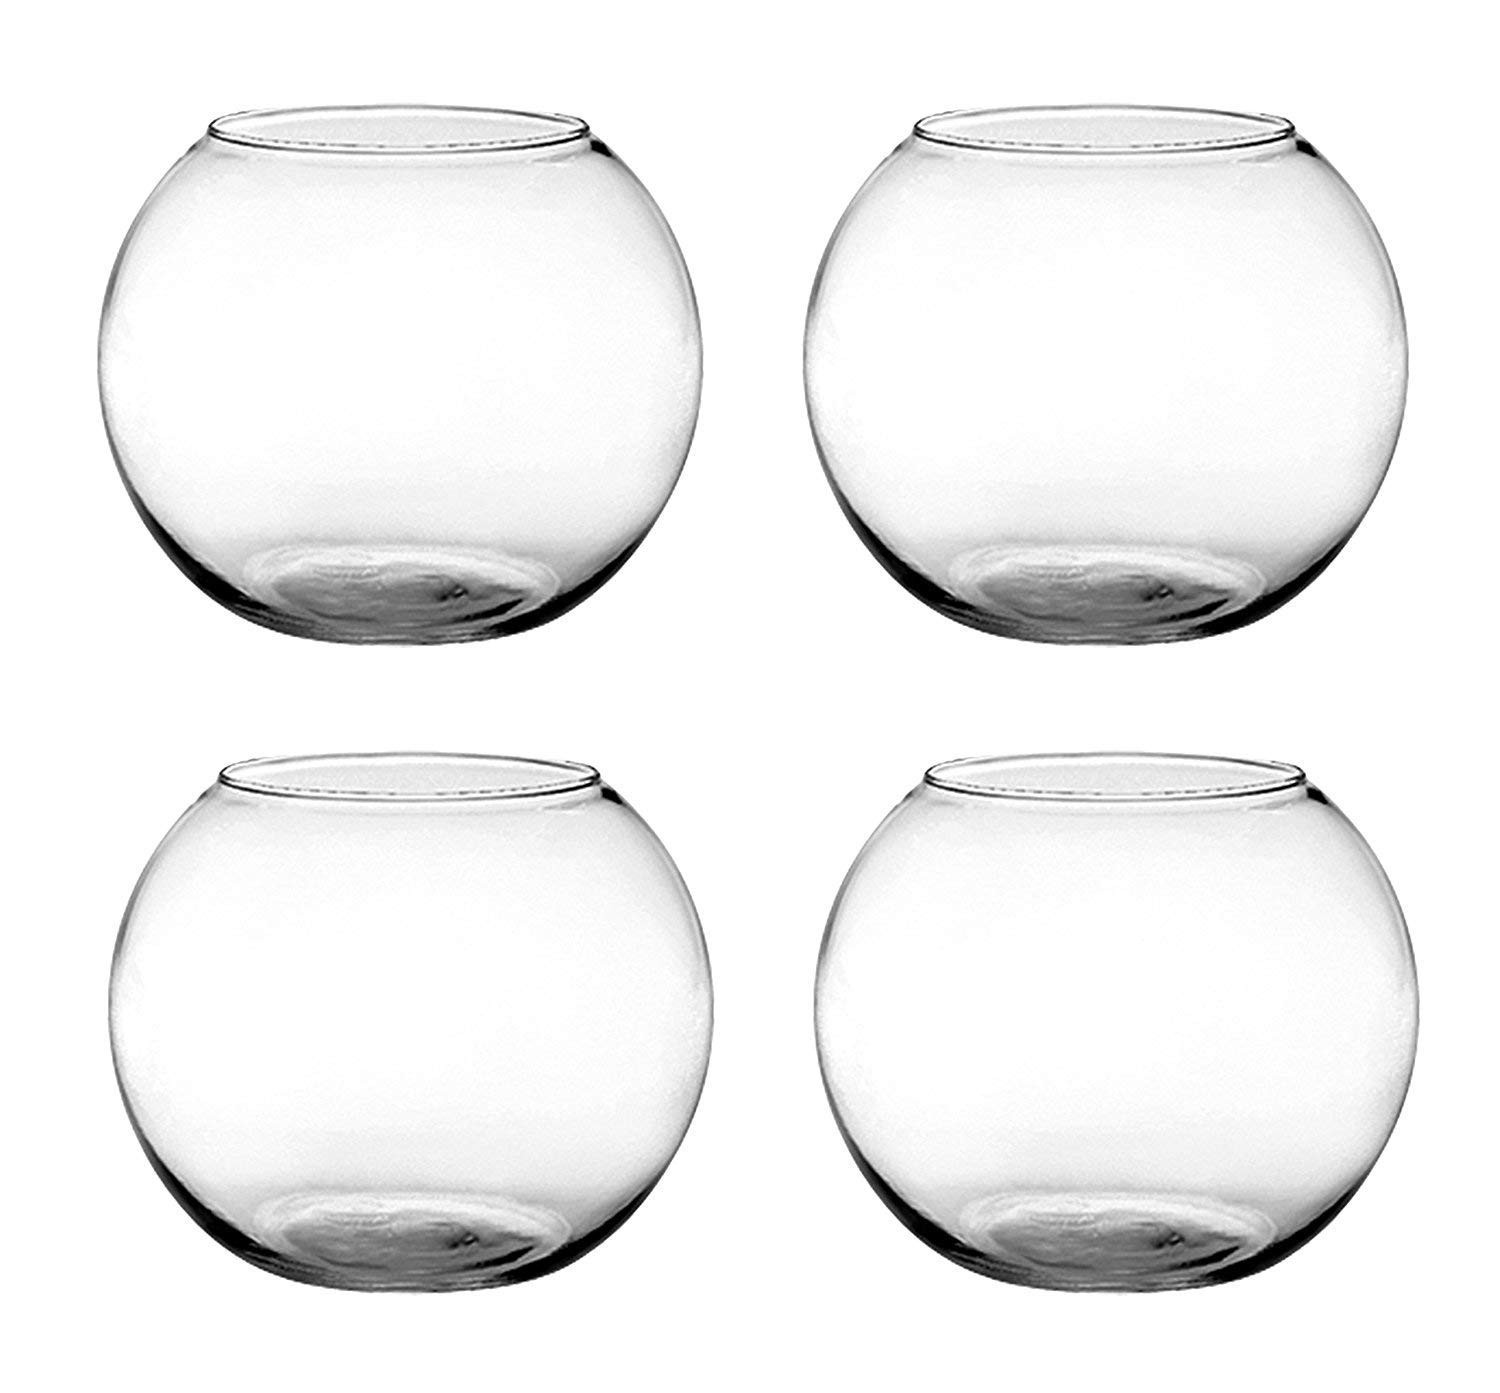 19 Awesome Set Of Small Glass Vases 2024 free download set of small glass vases of amazon com floral supply online set of 4 6 rose bowls glass with regard to amazon com floral supply online set of 4 6 rose bowls glass round vases for weddings ev